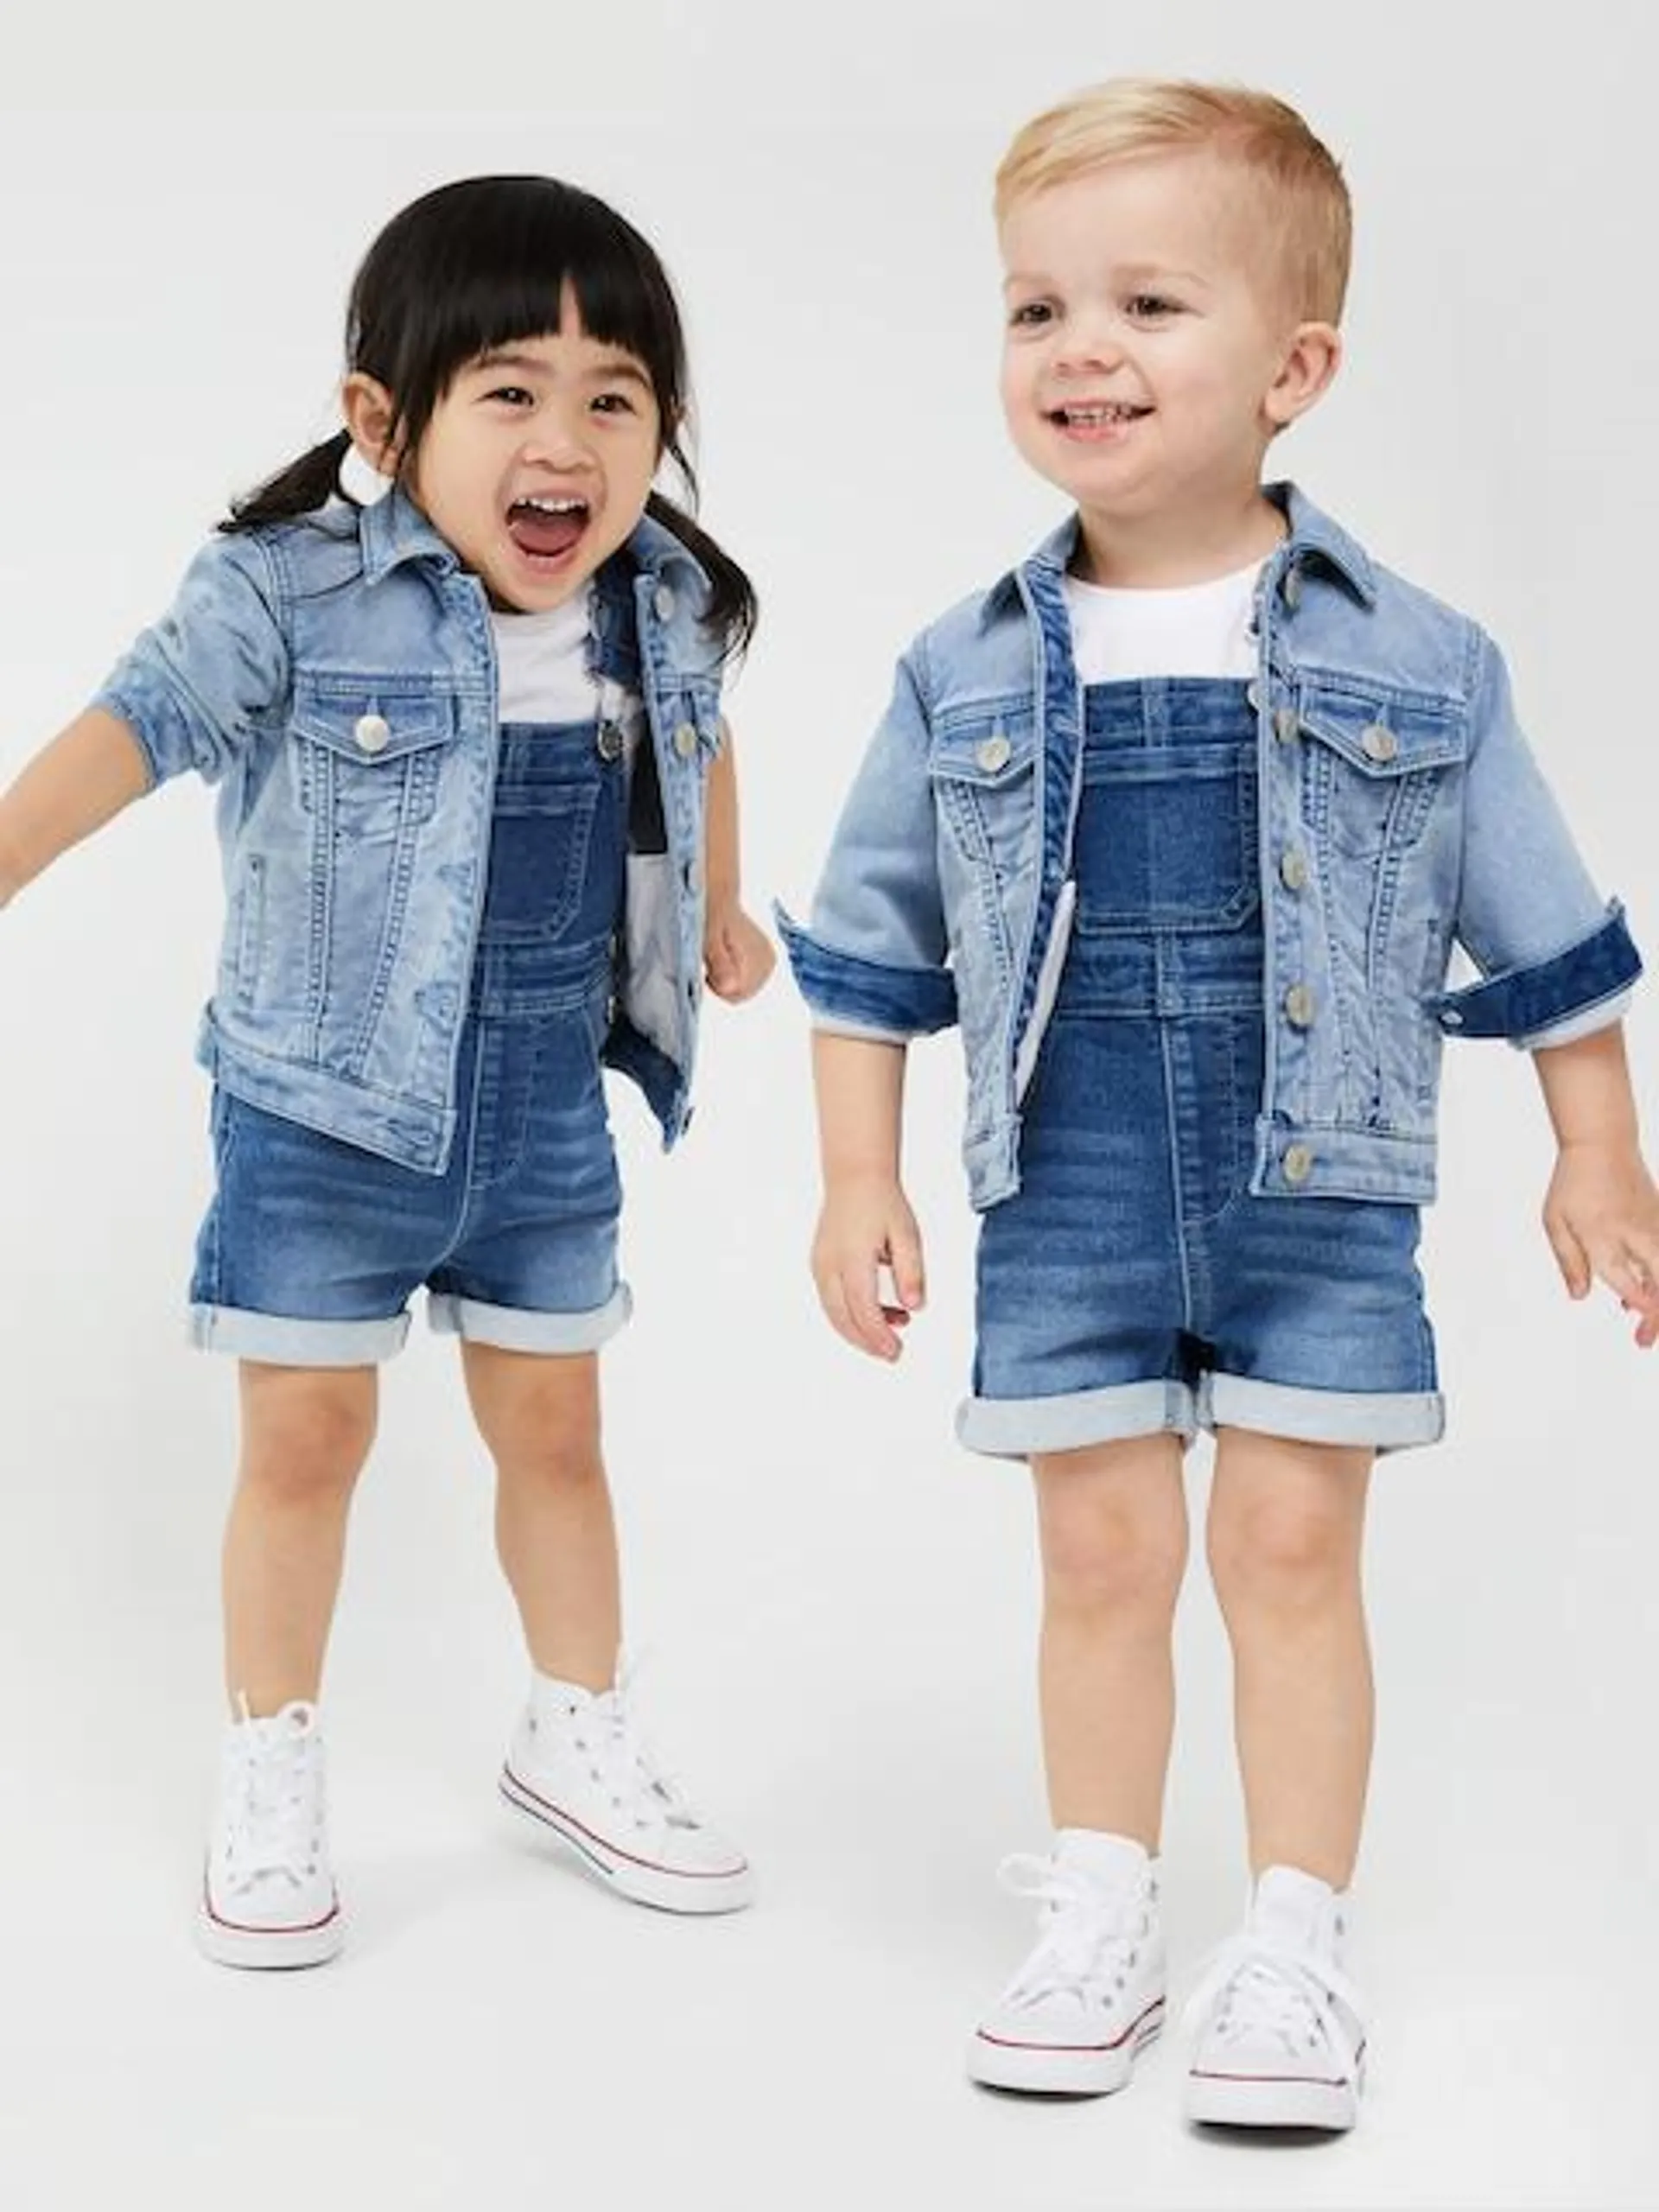 Just Jeans Baby Amaze Dungaree Short